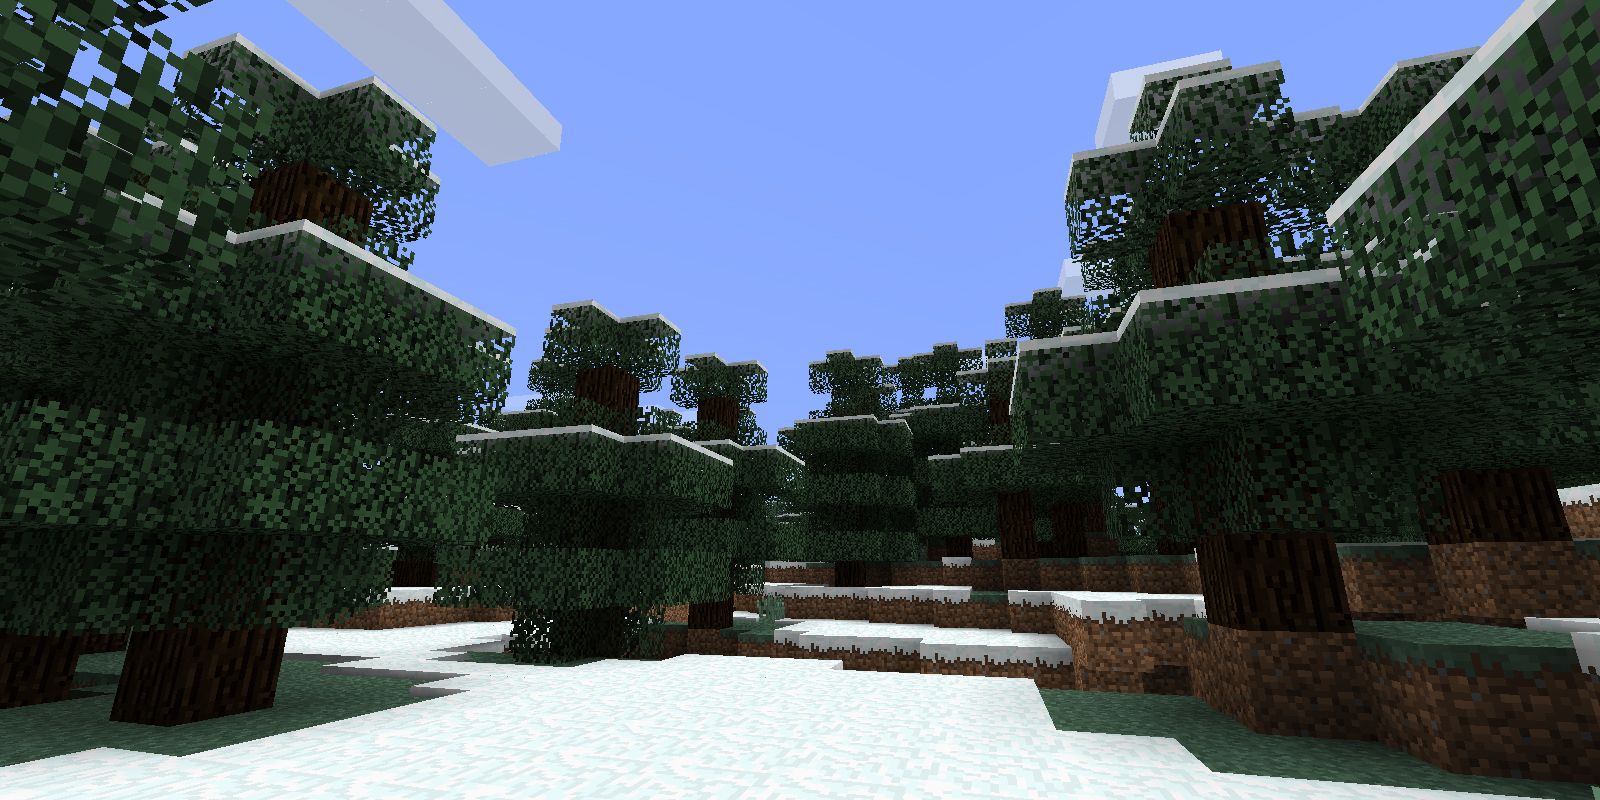 Minecraft Snowy Taiga with snow covered trees